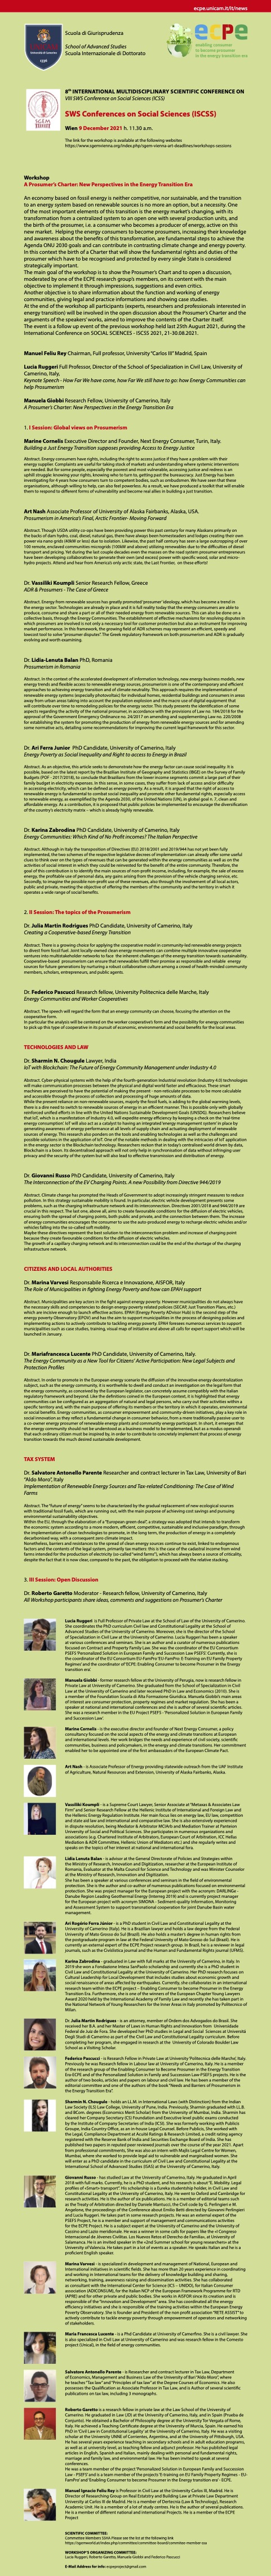 Brochure workshop "A Prosumer’s Charter: New Perspectives in the Energy Transition Era"